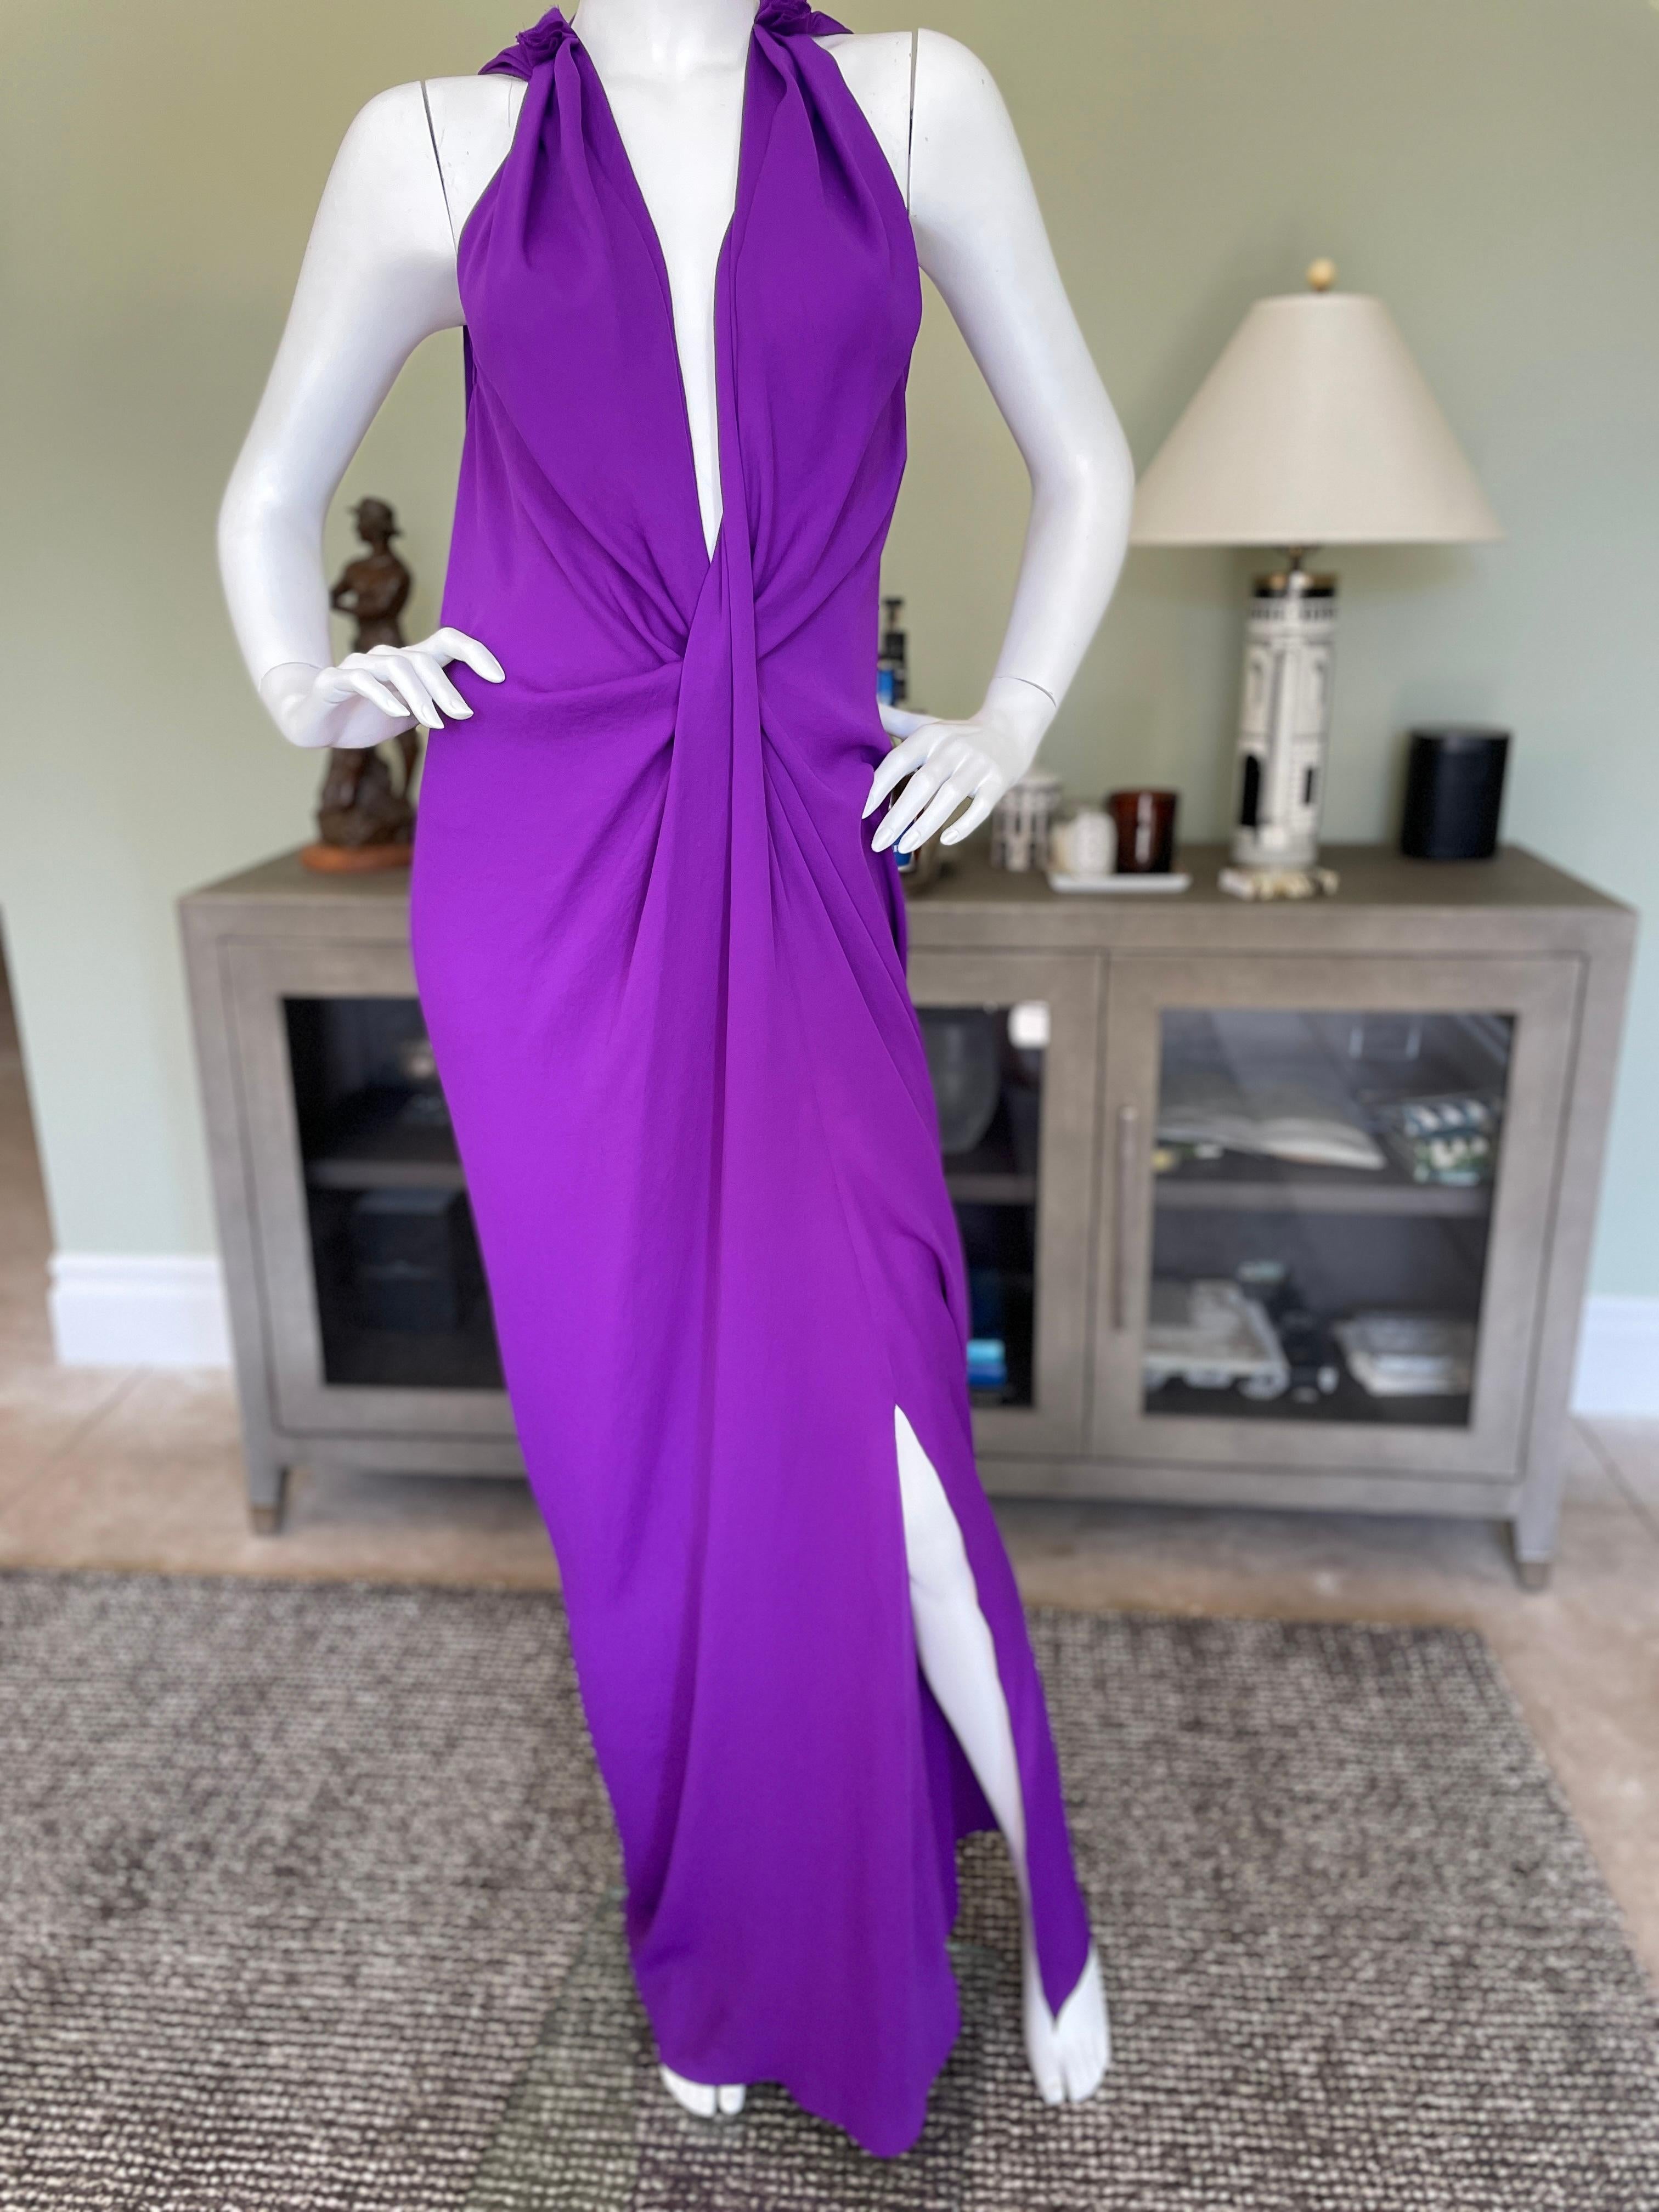  Lanvin by Alber Elbaz Plunging Purple Evening Dress with High Slit
 So beautiful, much prettier in person.
Size 36, but cut very generously.
Bust 44